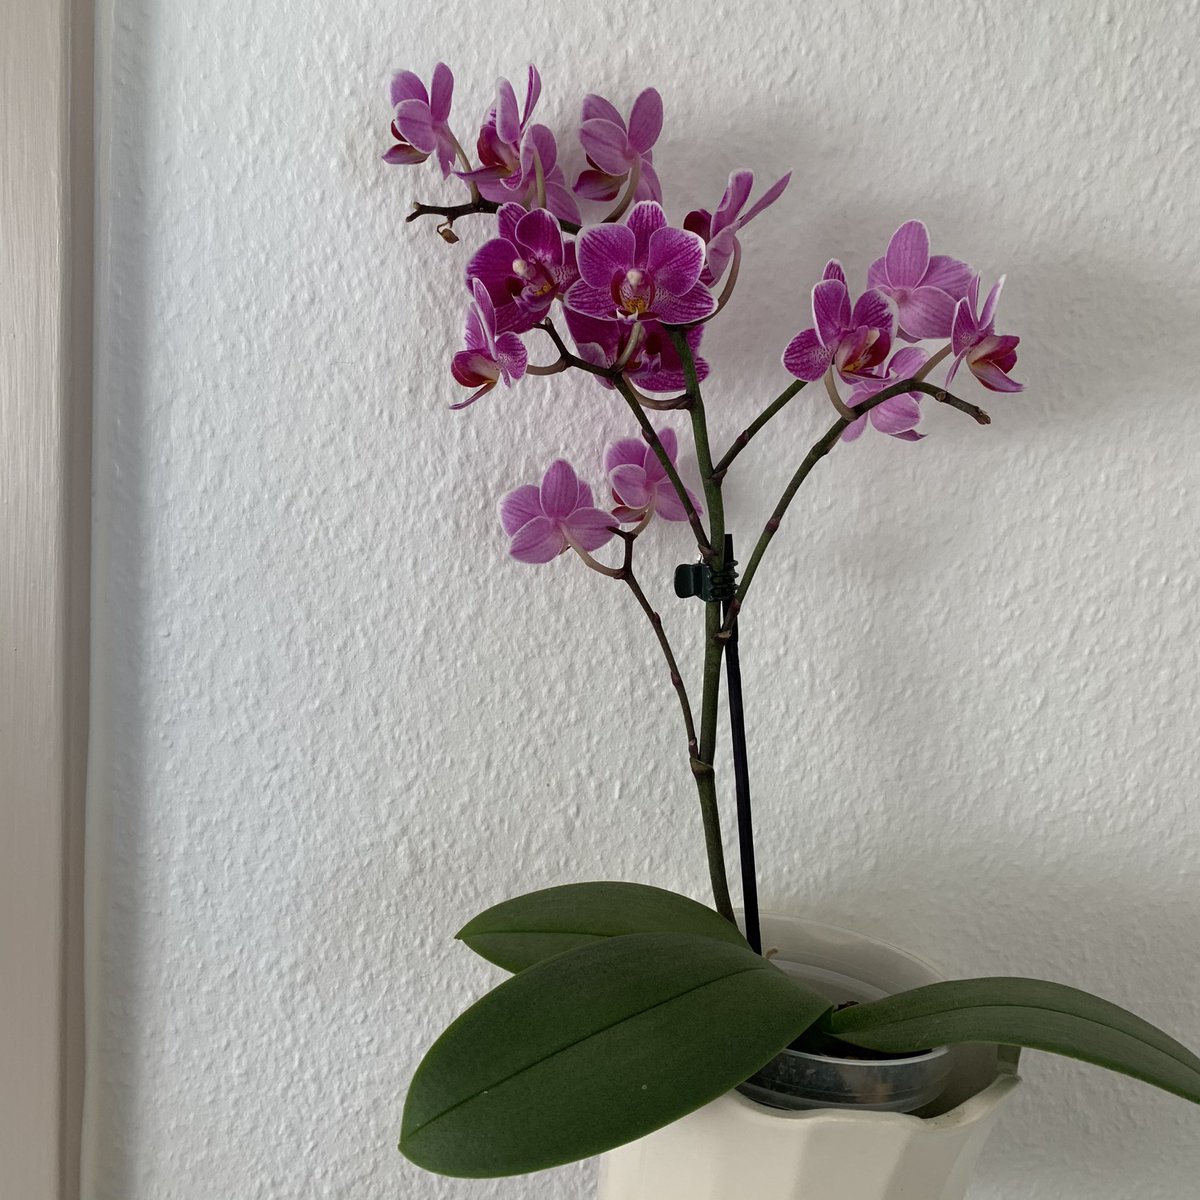 An orchid I got for my birthday 